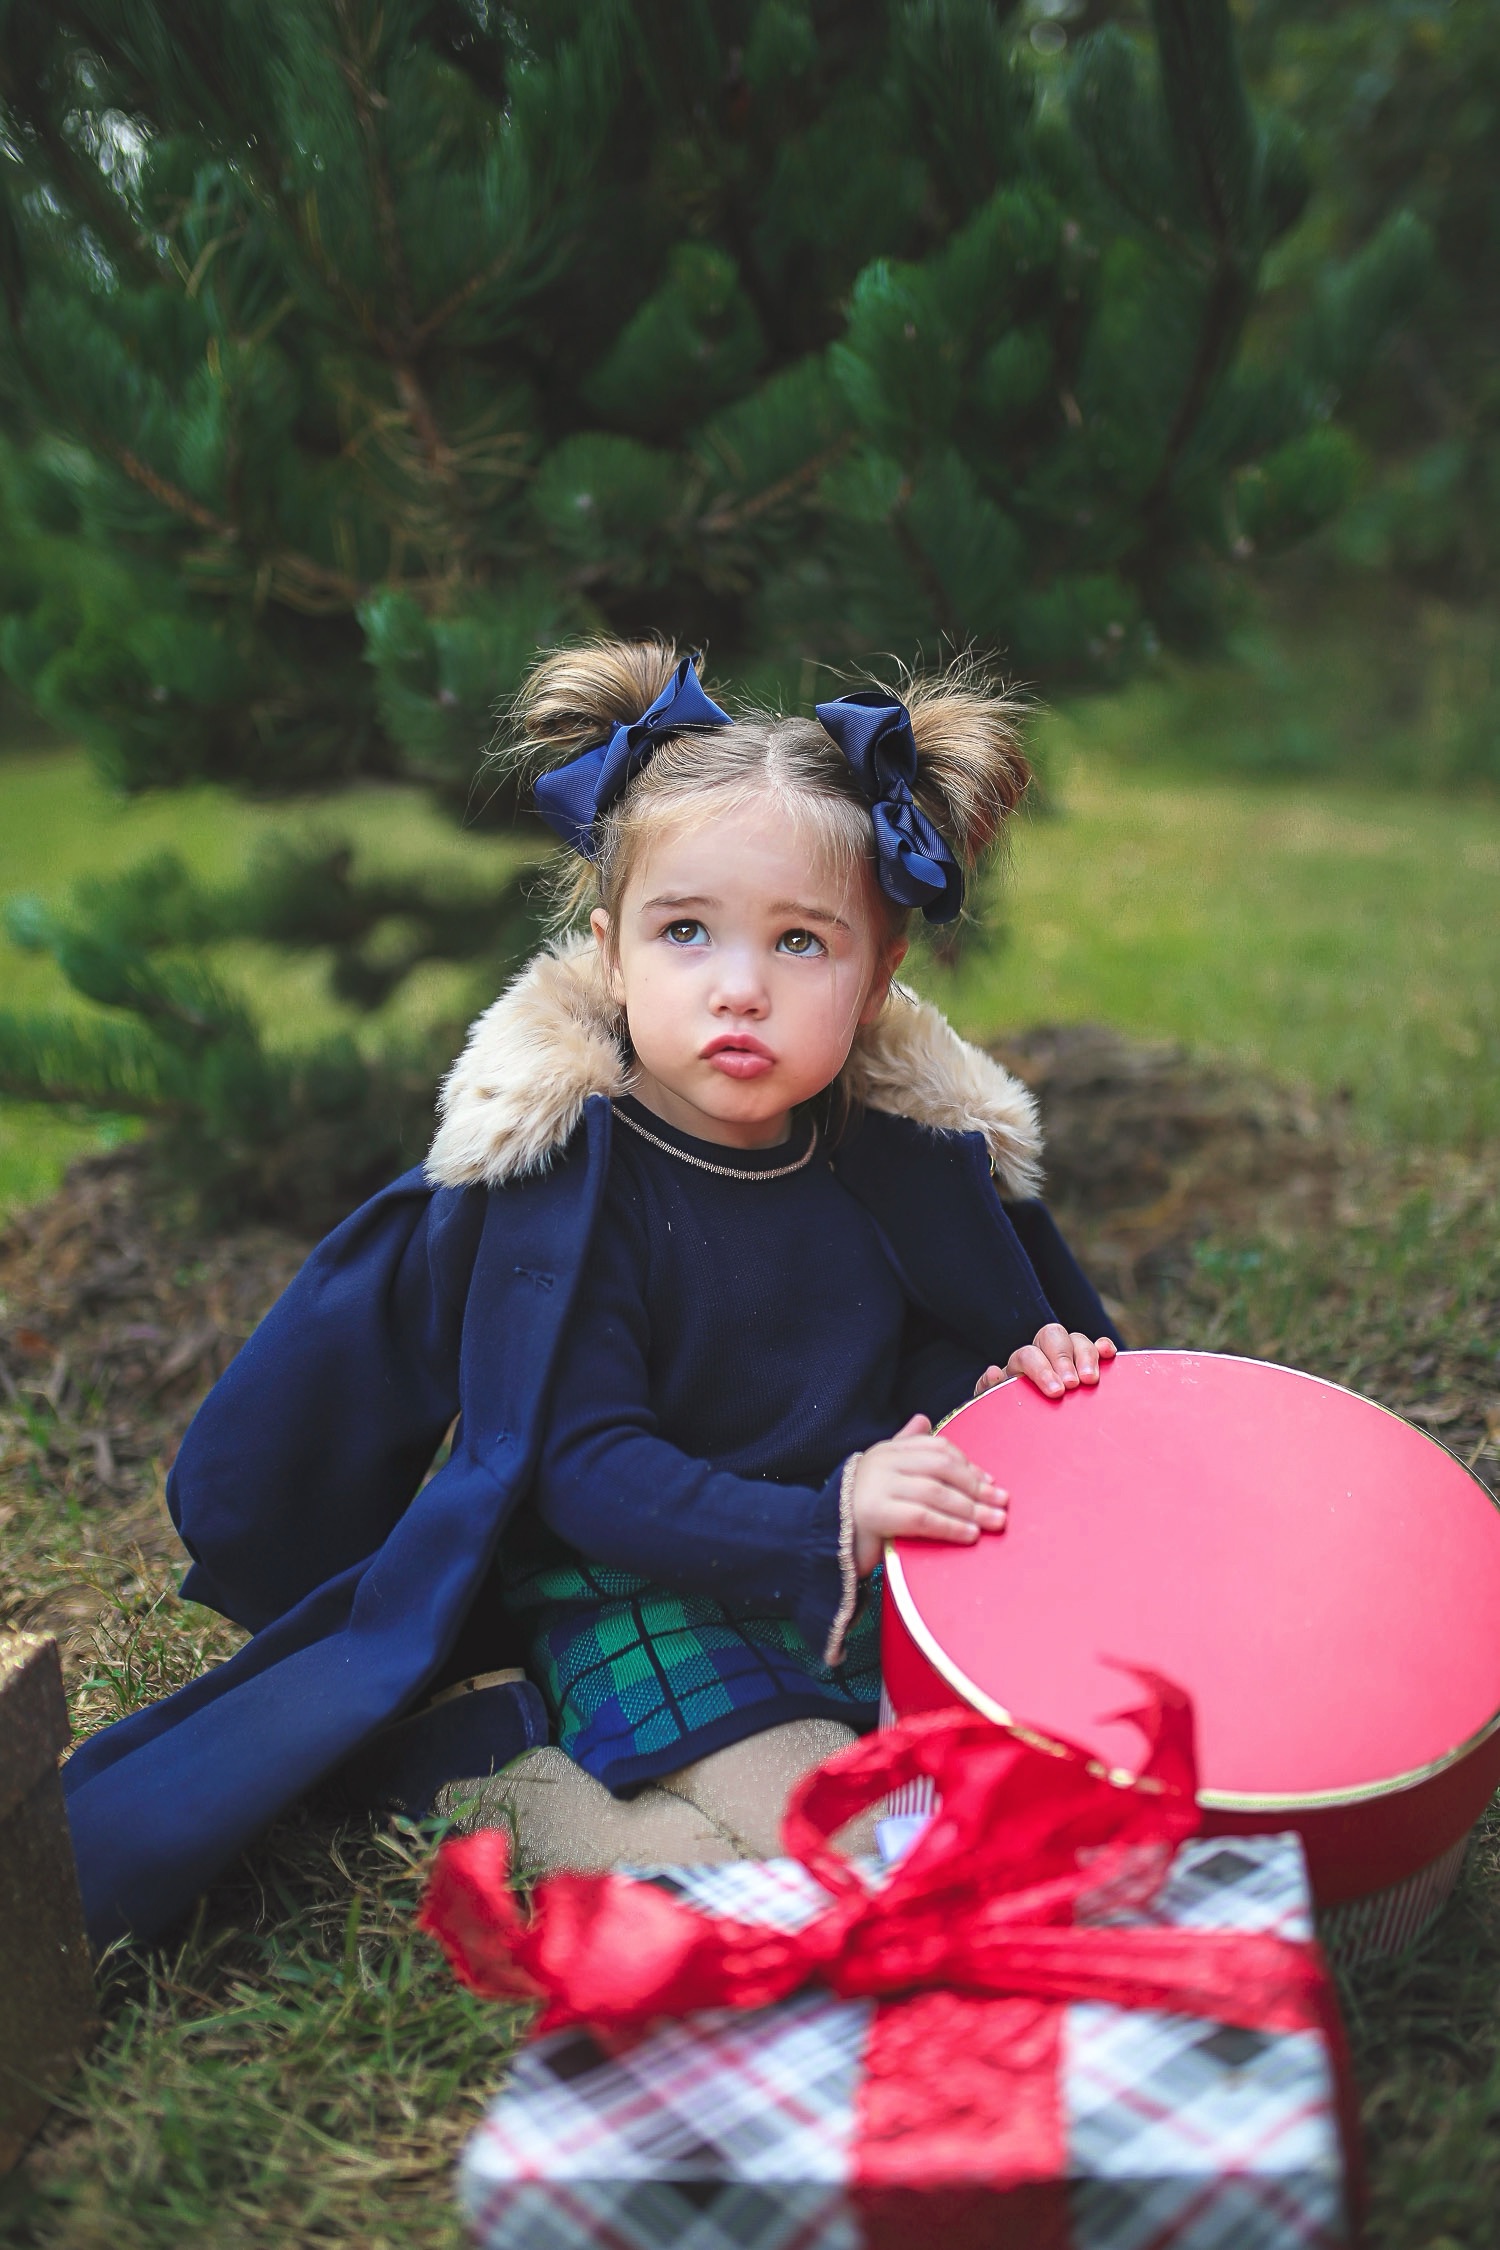 Janie and jack holiday 2021 Christmas card outfit, kids holiday outfit ideas 2021 Pinterest, toddler outfits matching Janie and jack 2021, Sophia gemma